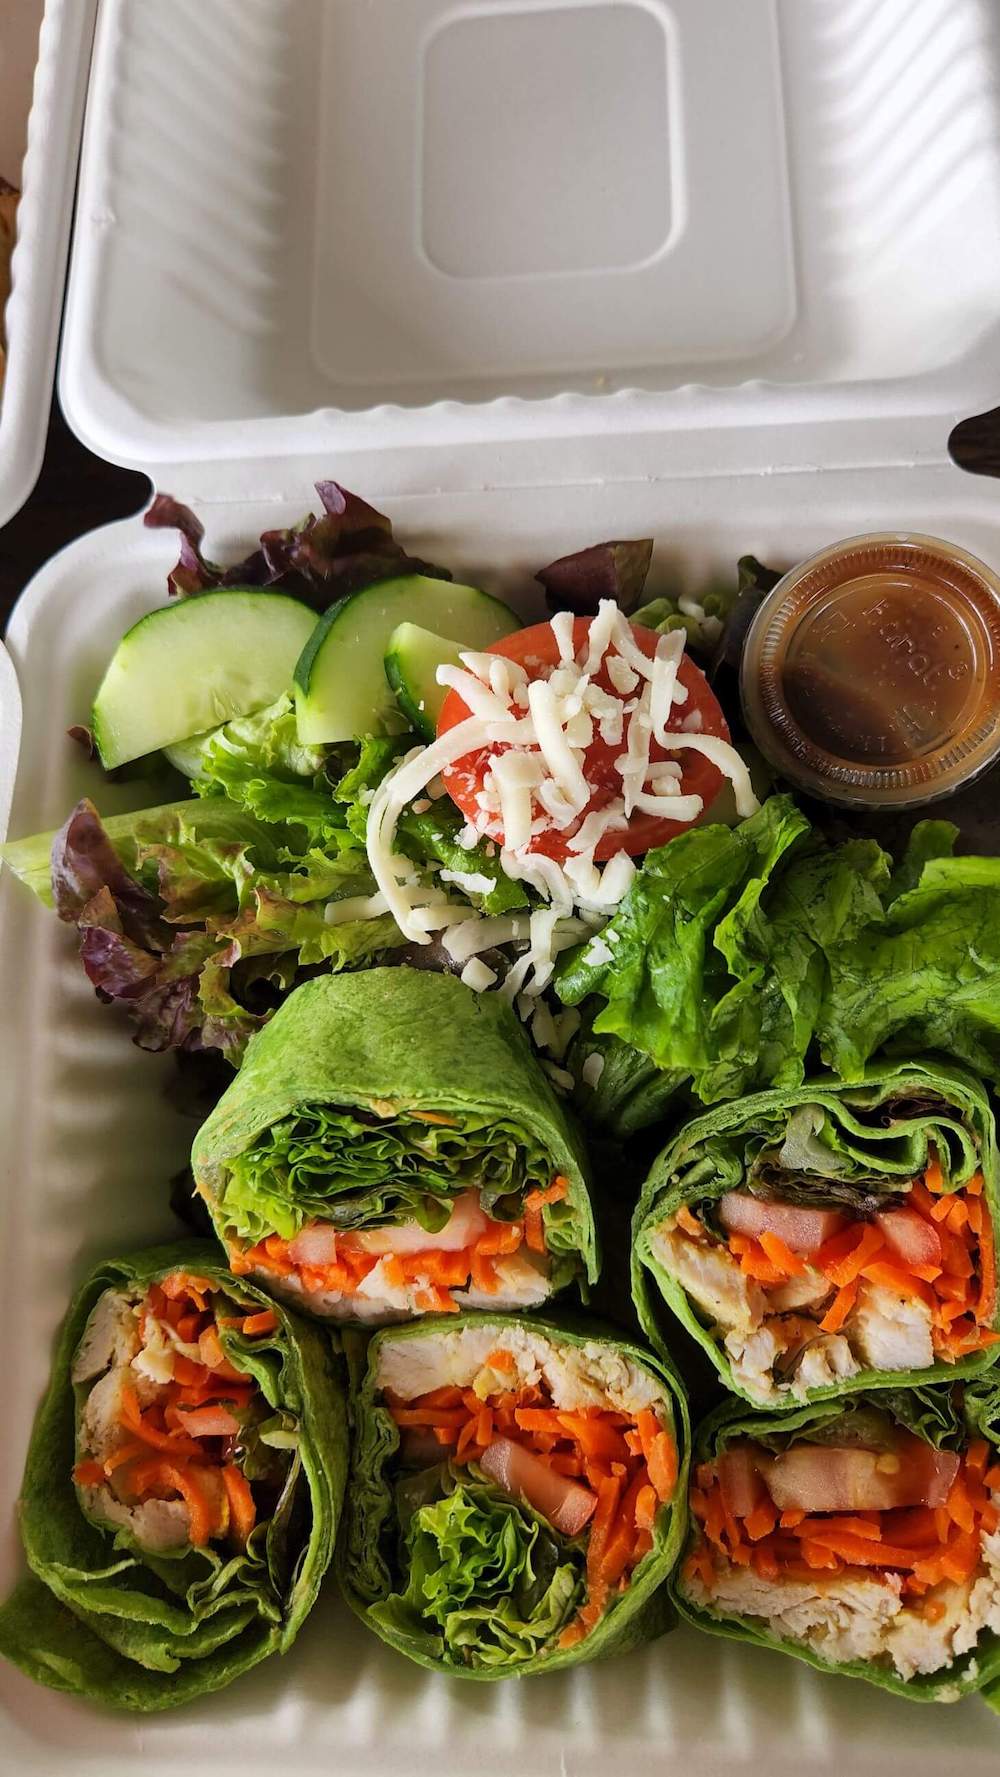 Image of chicken wraps from Kahuku Farms on Oahu